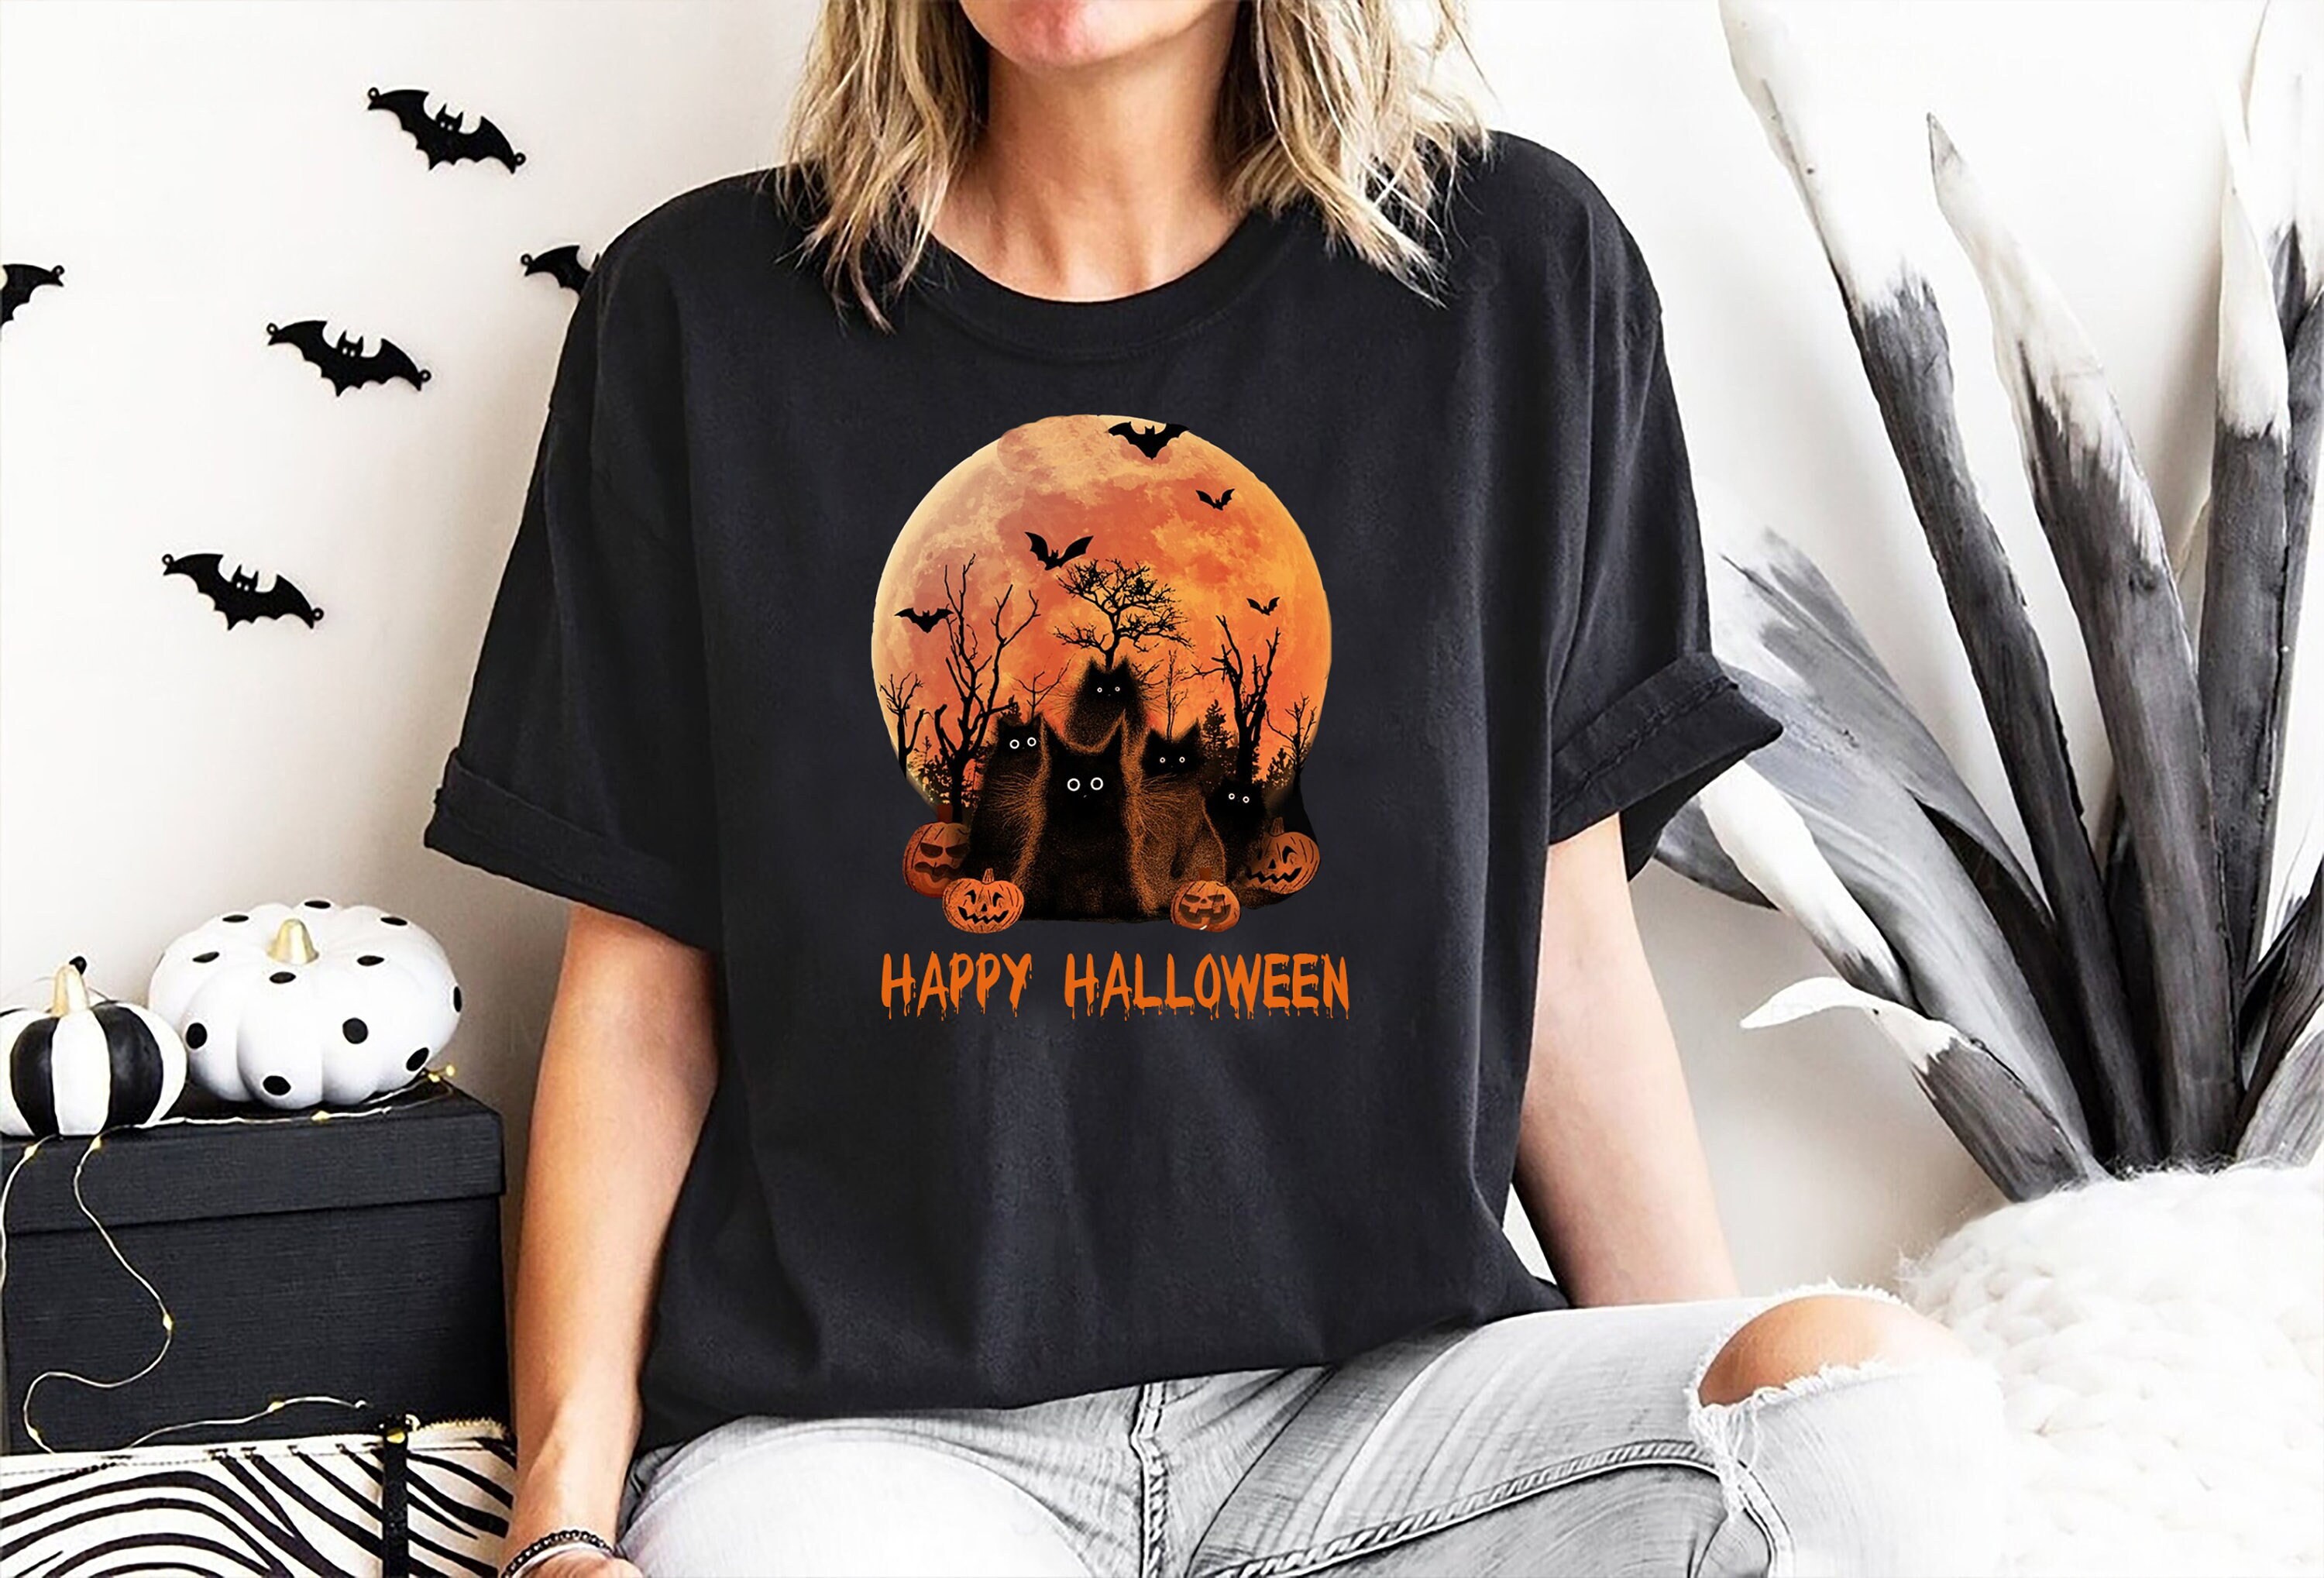 Halloween Pumpkin Neck Tie Associate Boo Shirt with Name Badge & Ghost   Graphic T-Shirt for Sale by FunWearVM